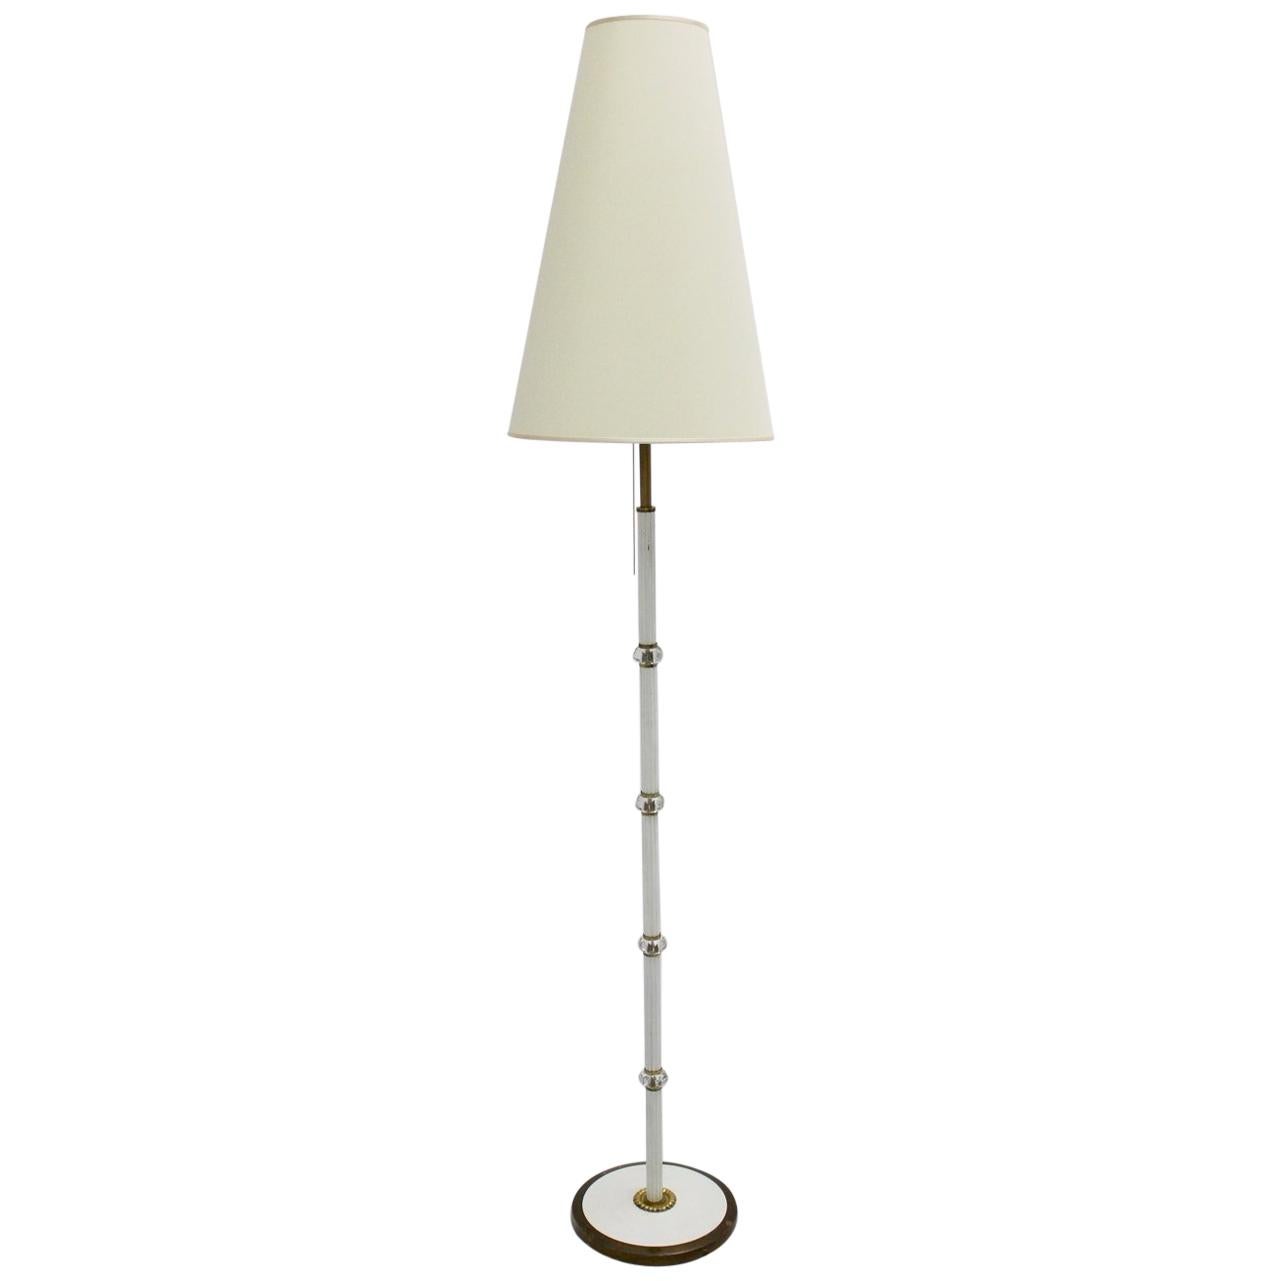 Mid-Century Modern Brass and White Vintage Floor Lamp, 1940s, Italy